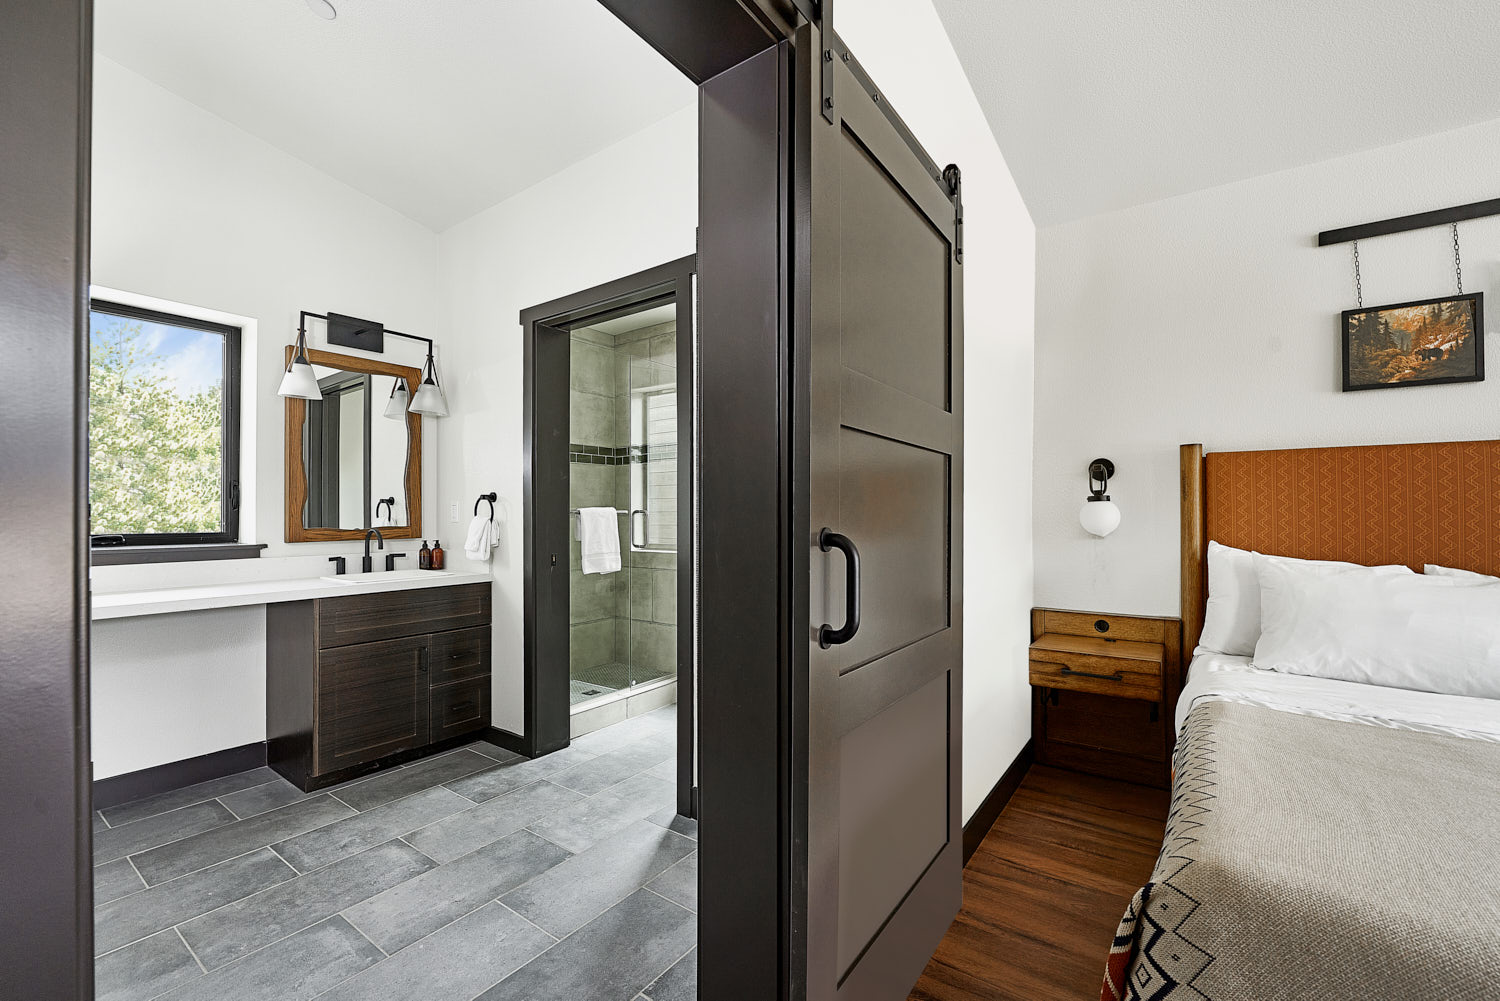 Photo captures the interior of an attached bathroom from the bedroom perspective.